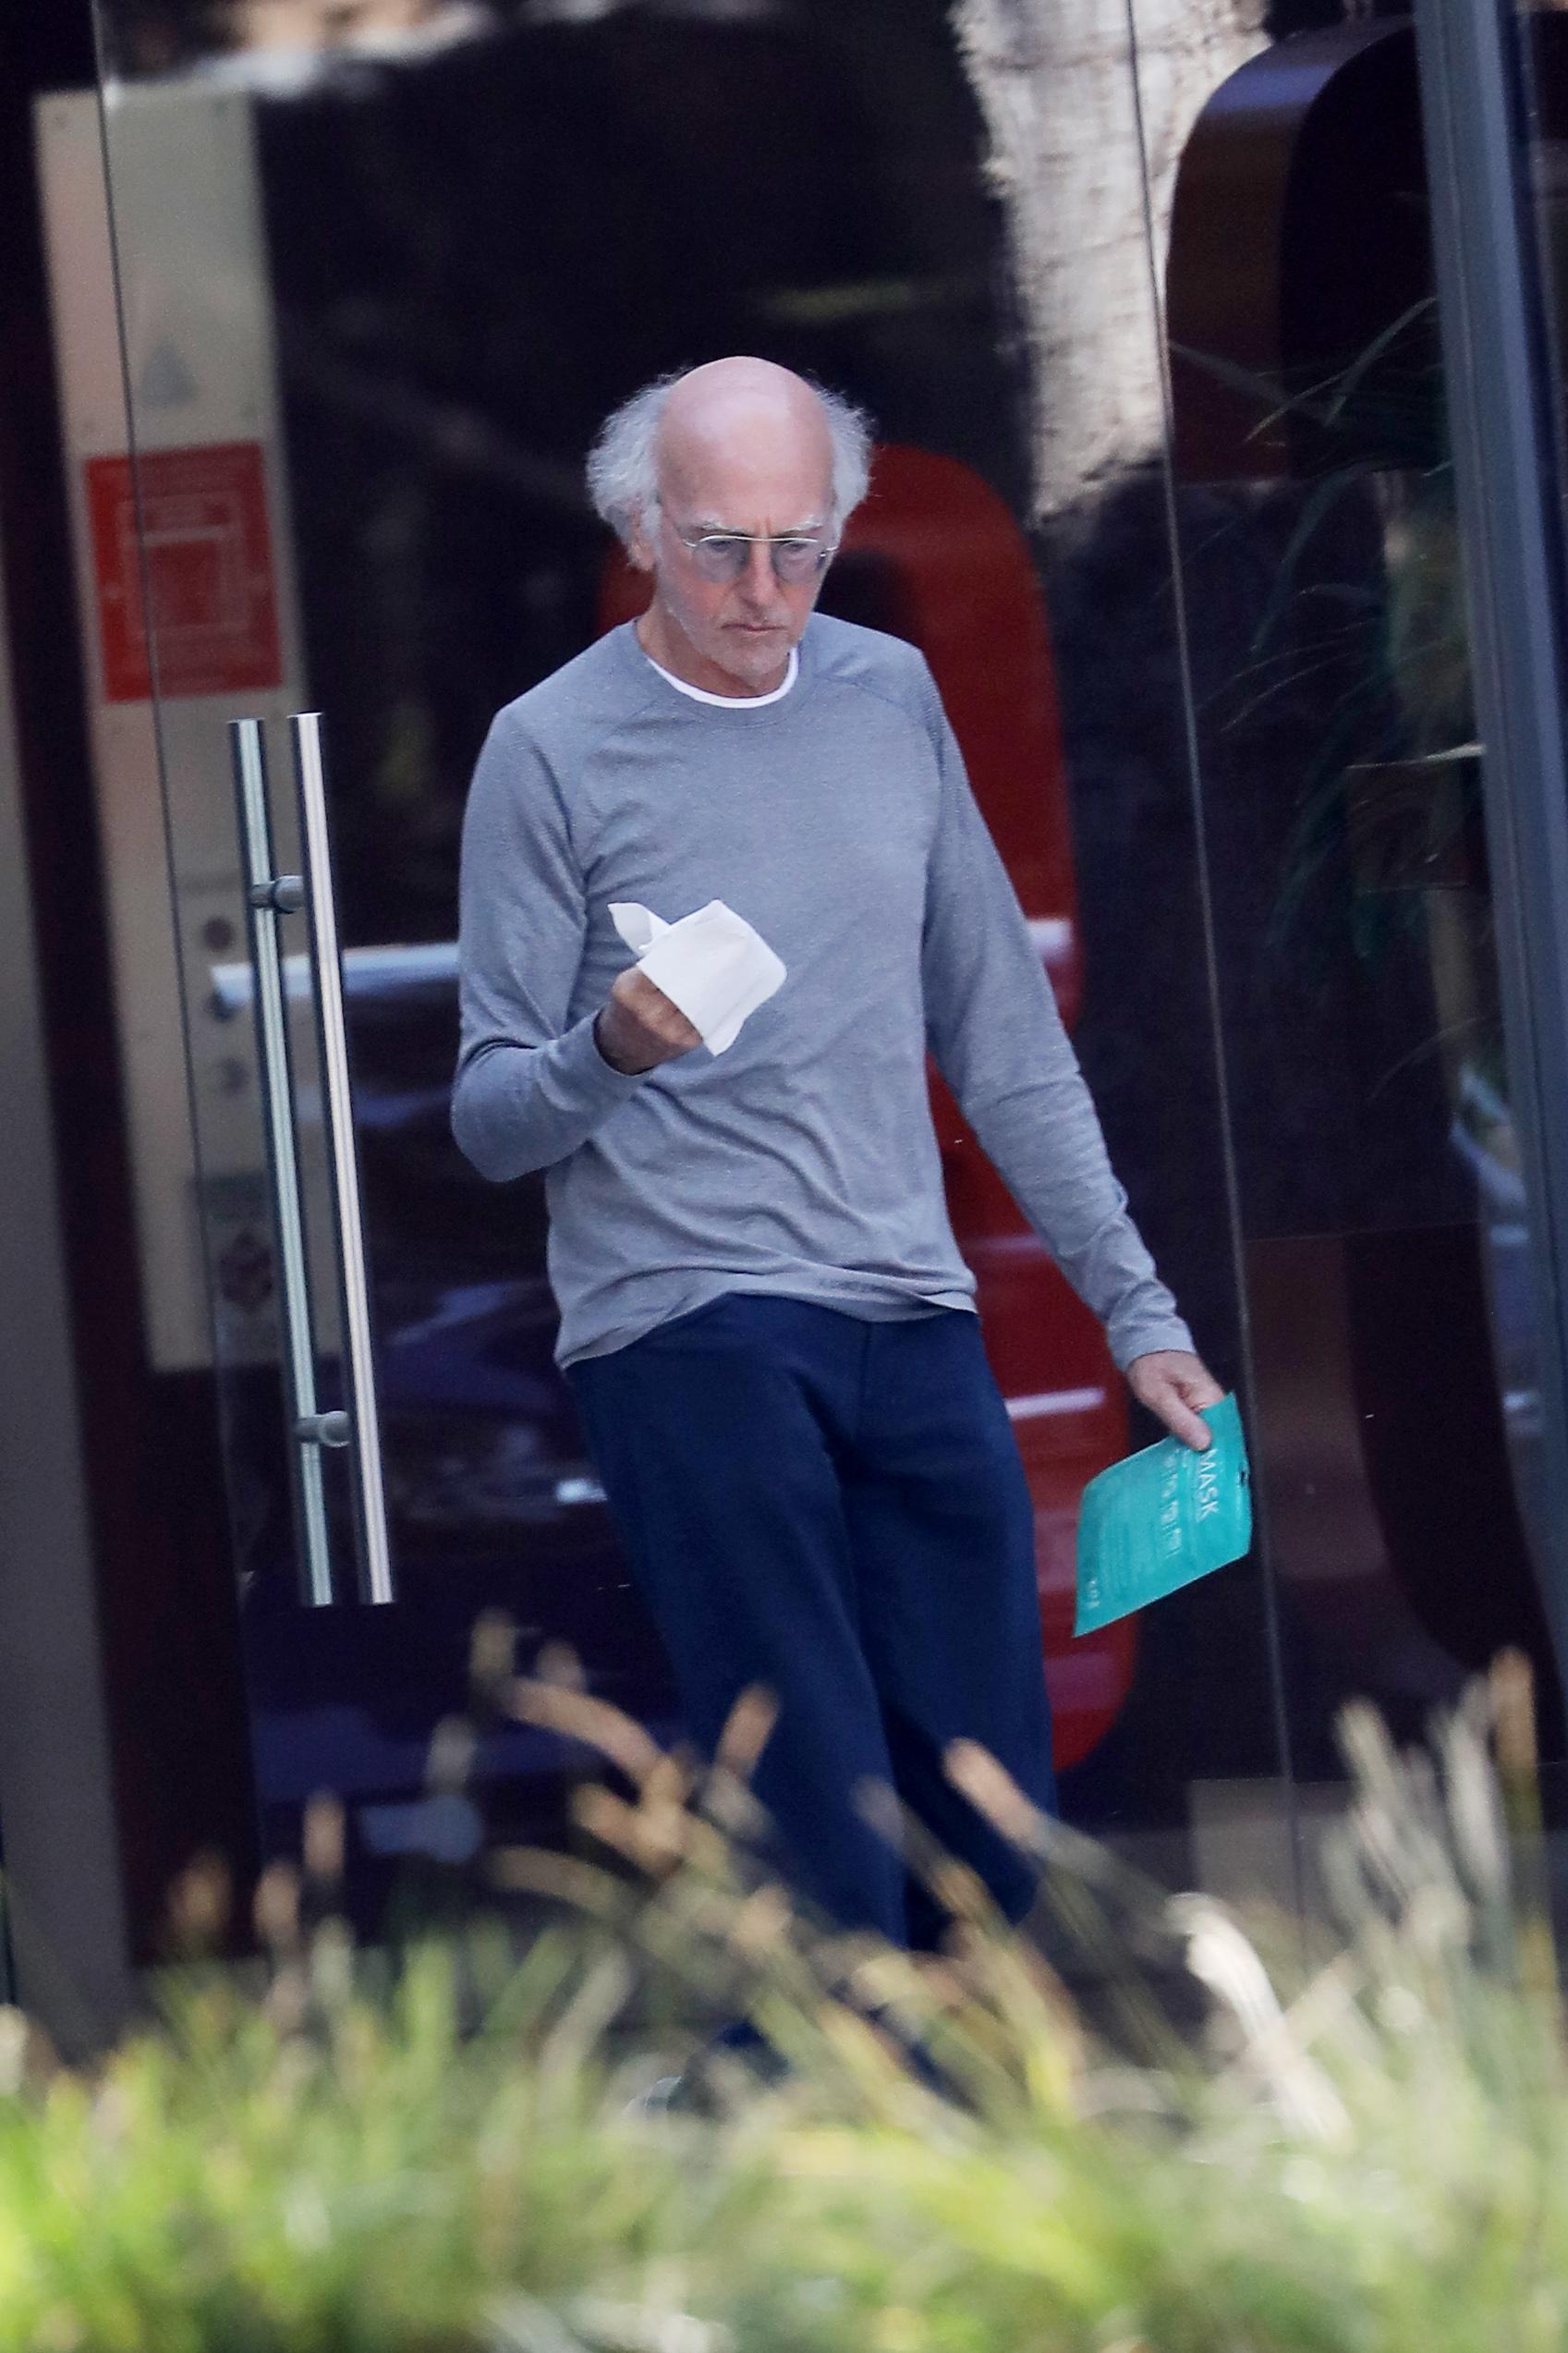 Newly wed Larry David coming out of an office building